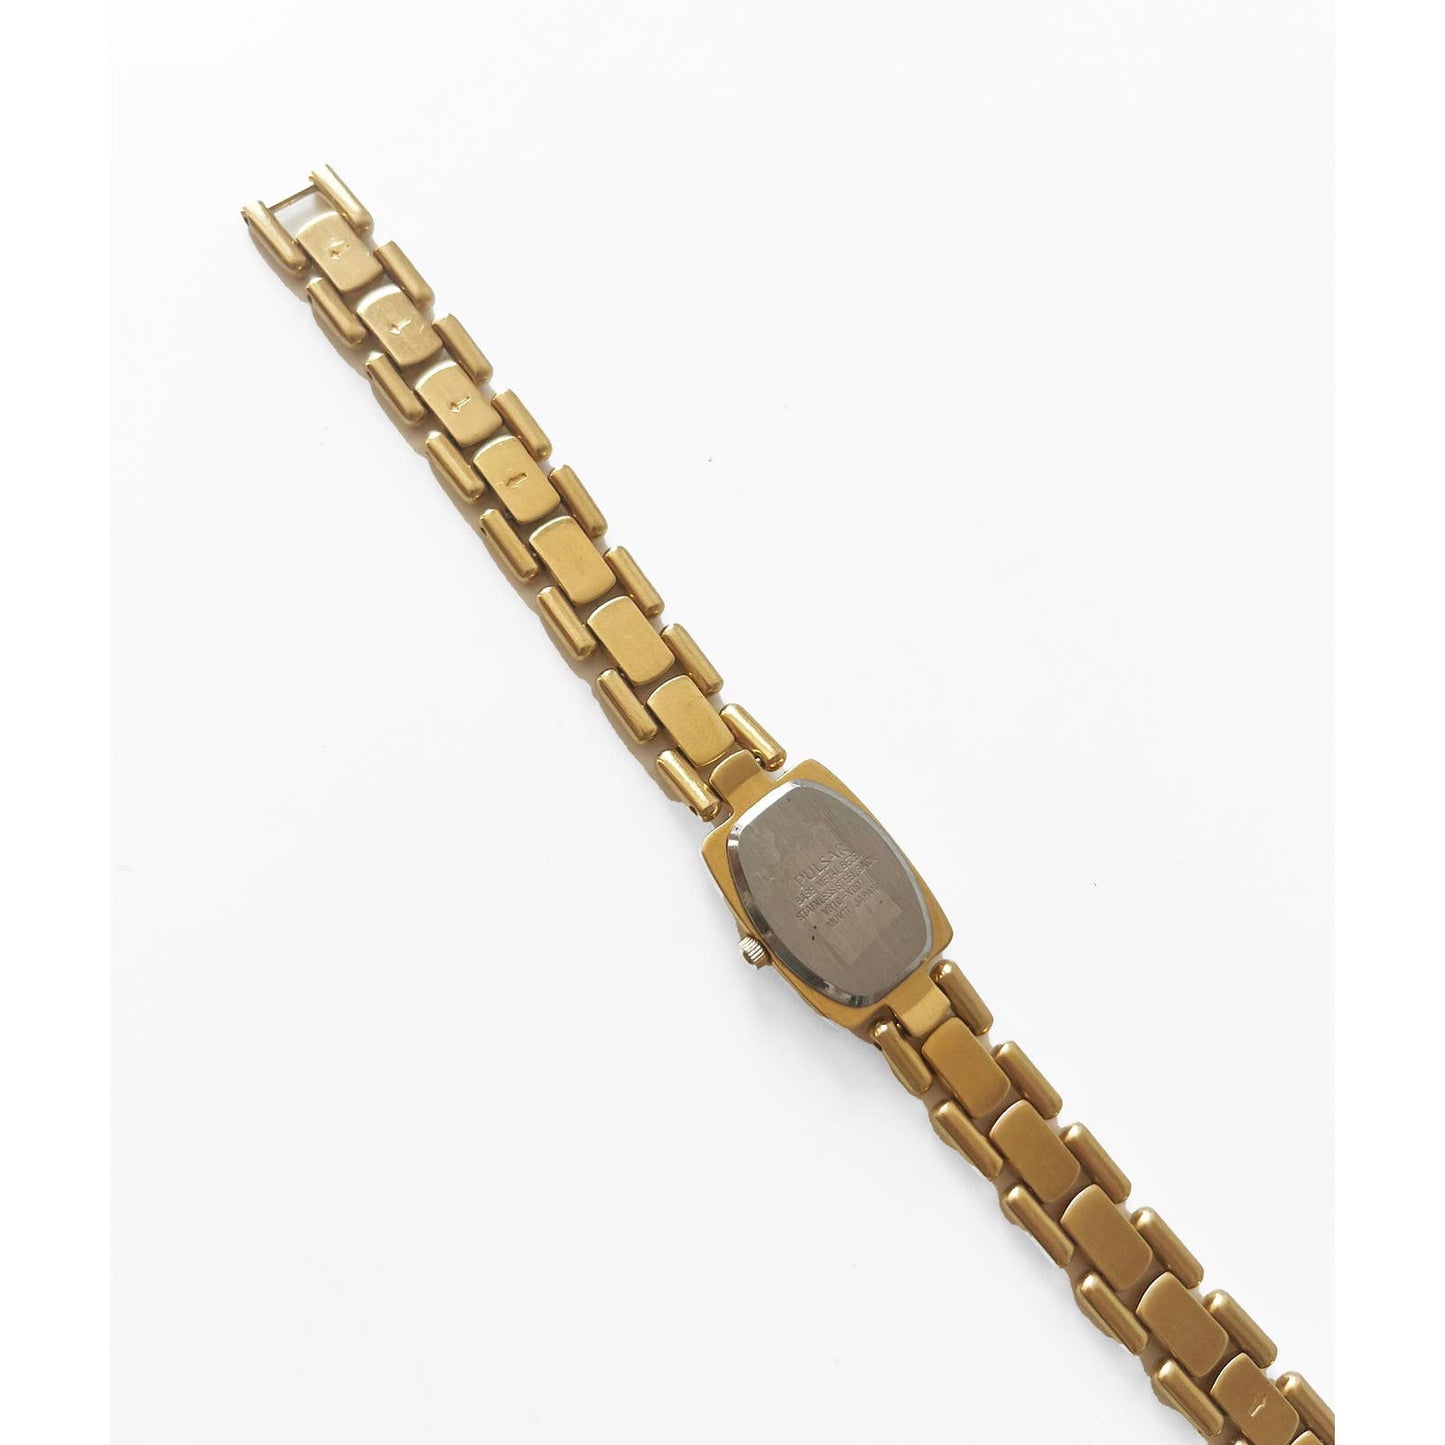 Vintage 90s Small Gold Watch with Rectangular Face | Pulsari